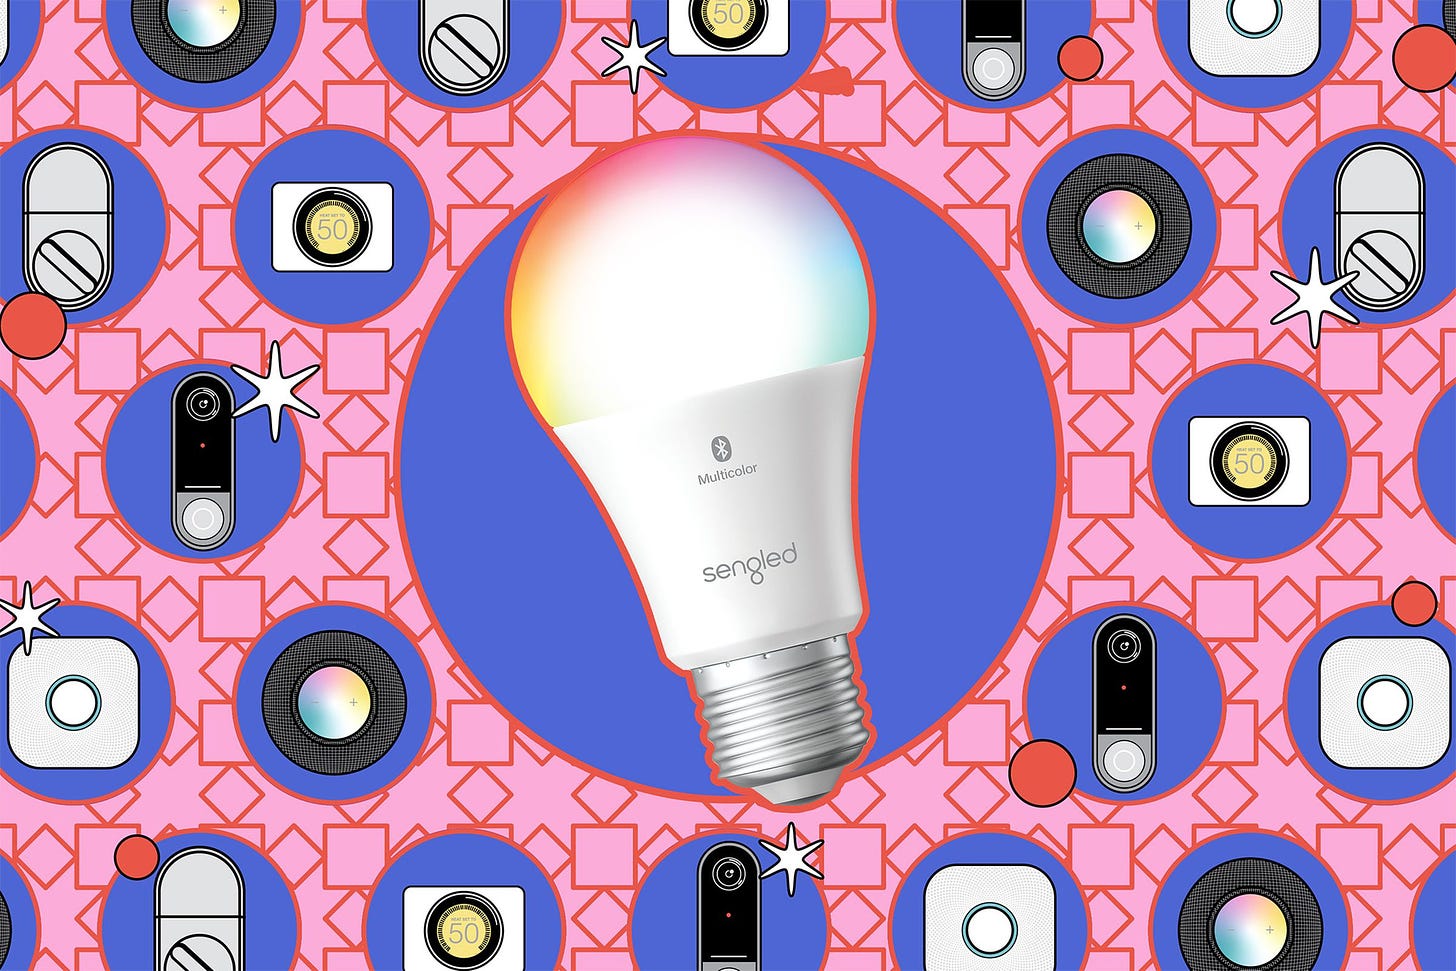 An illustration featuring a light bulb and several smart home devices.